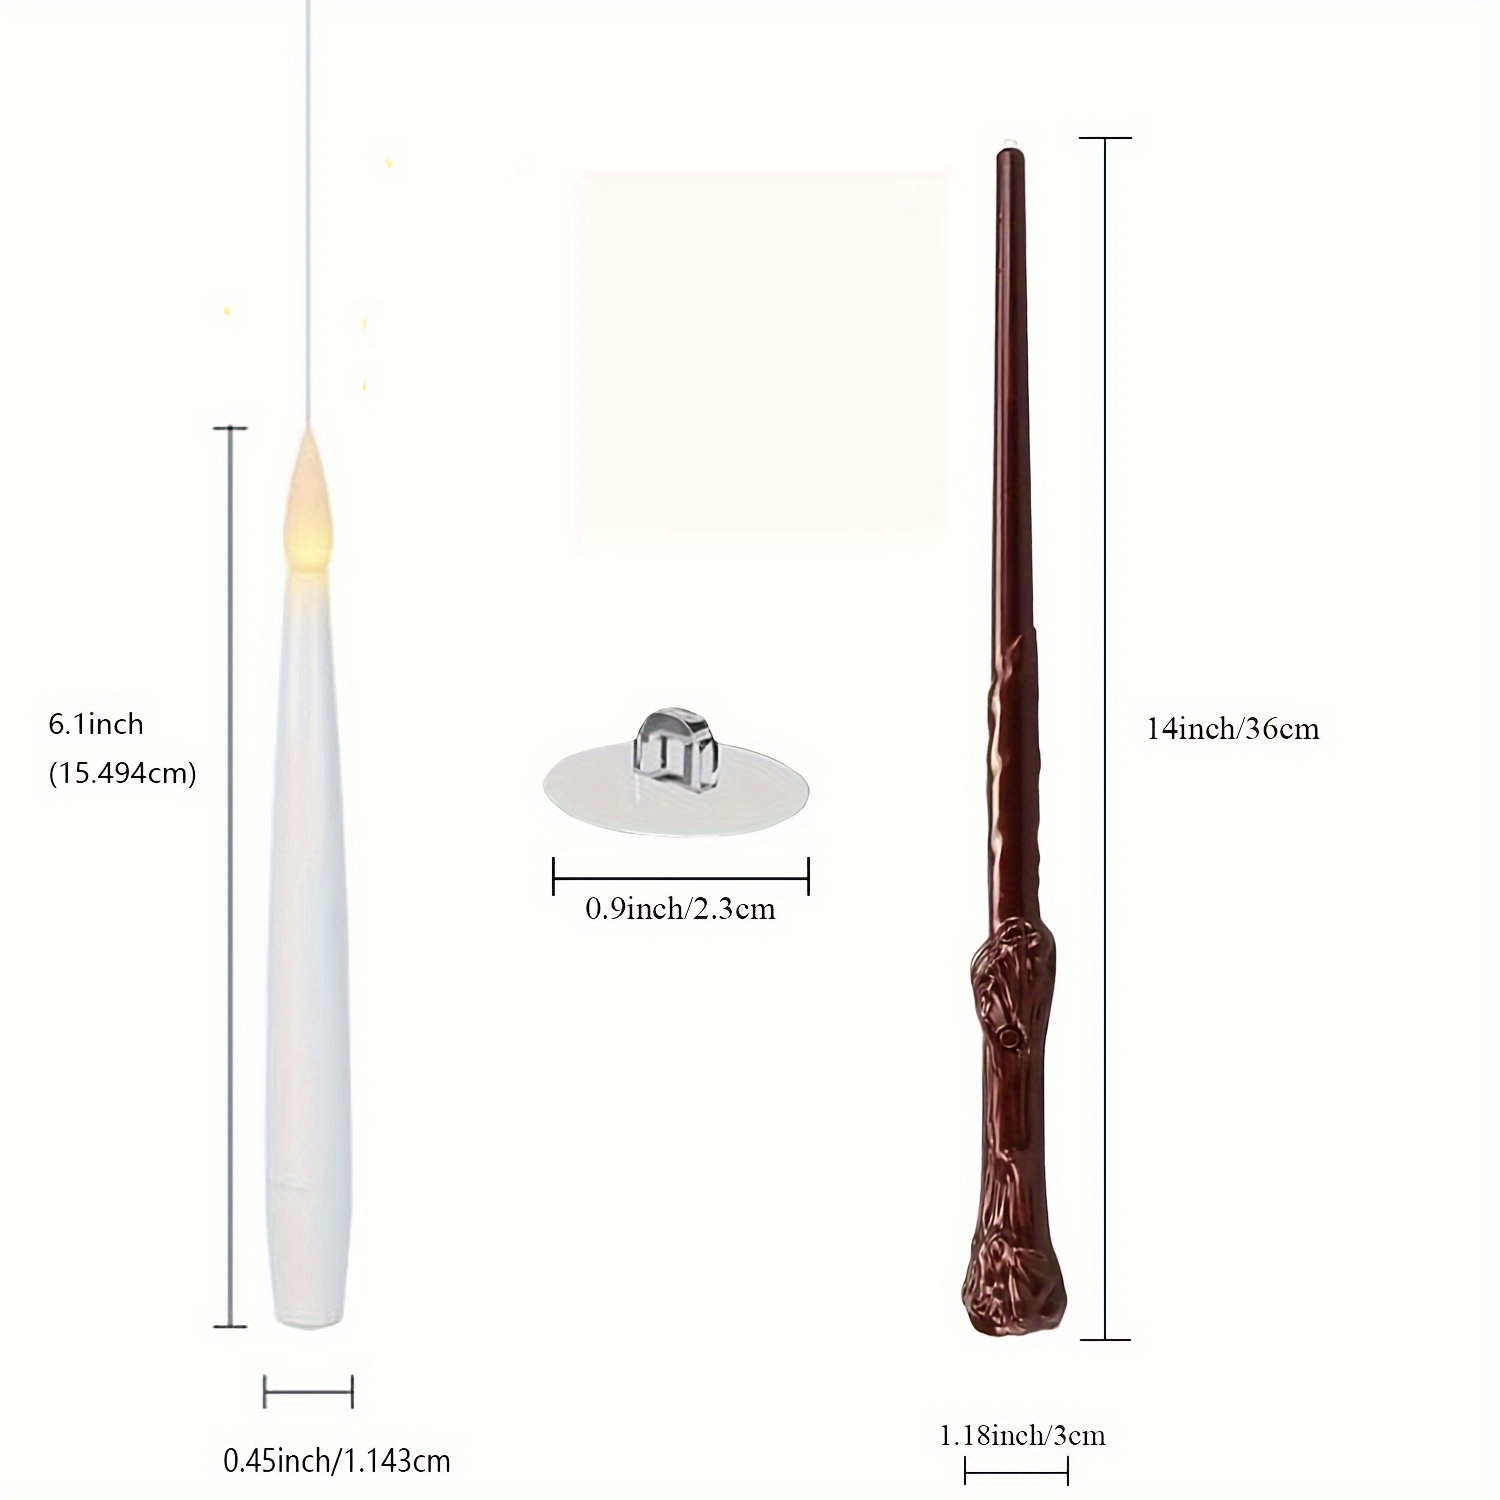 LEVITAYT™ Magical Floating Candles (wand included)